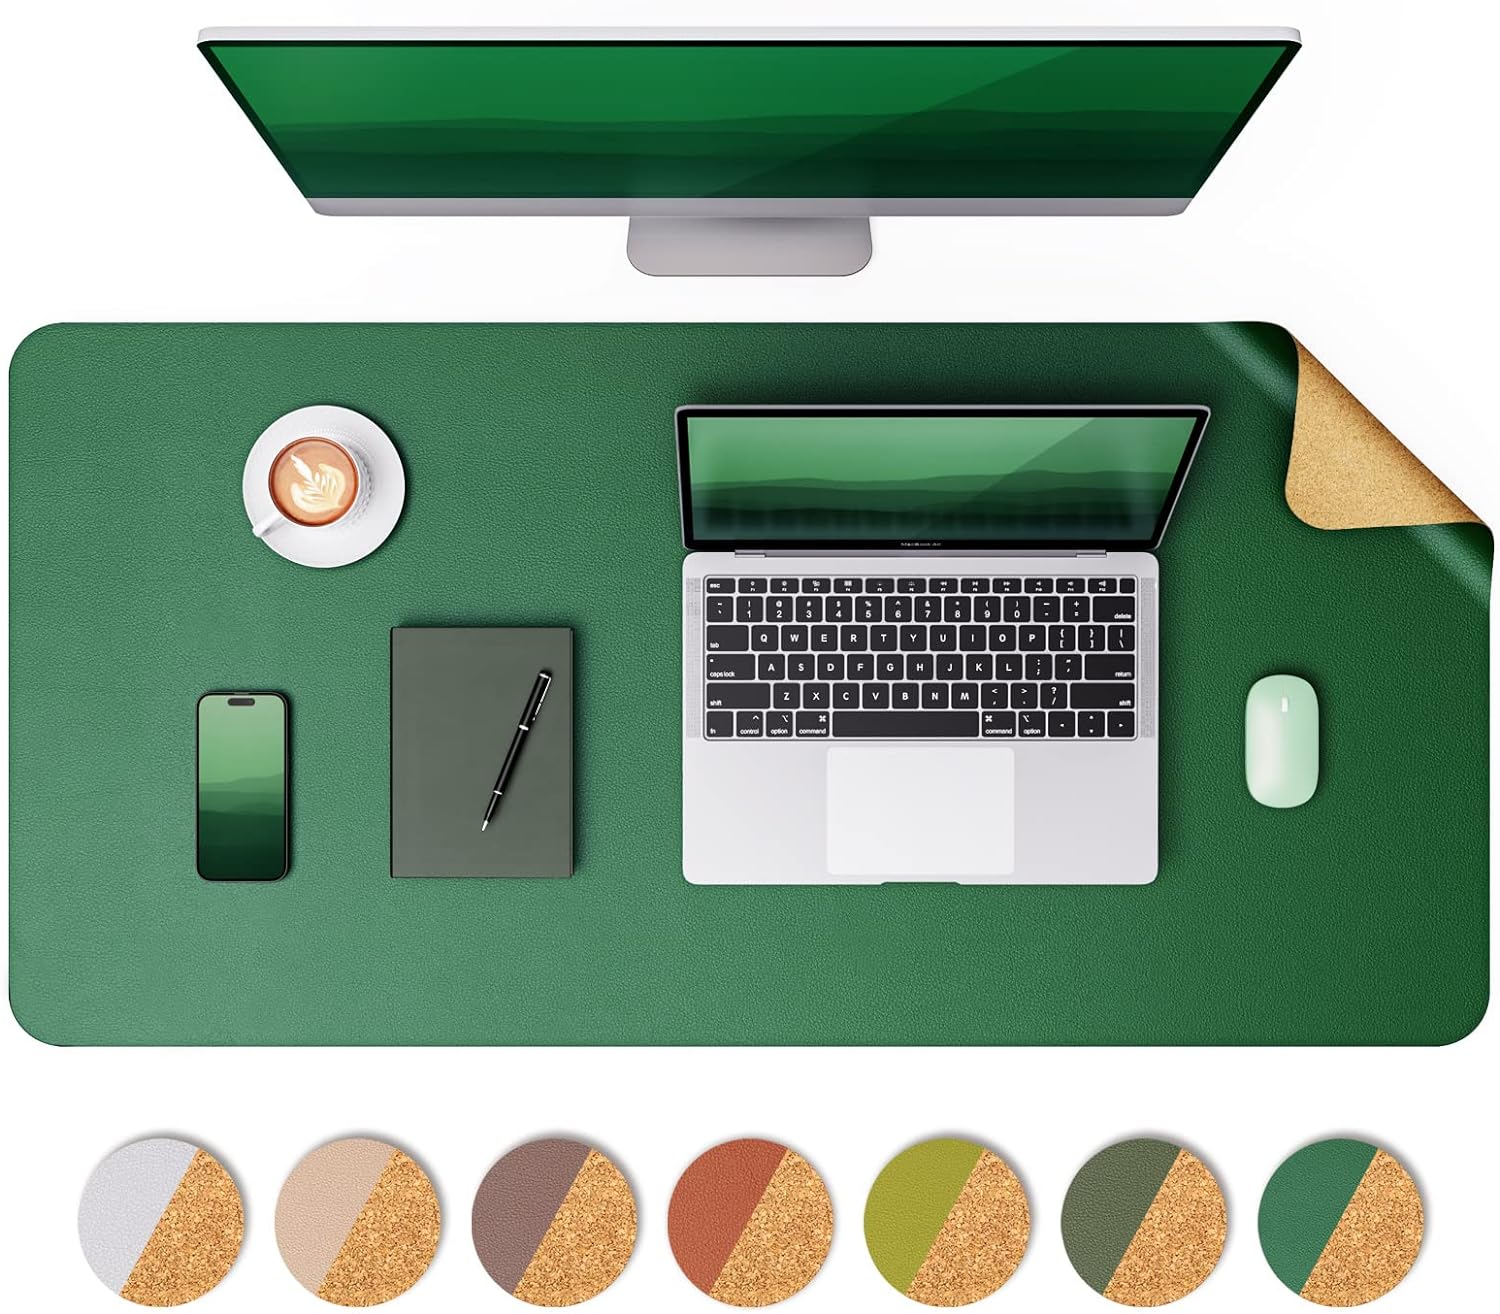 YSAGi Double-Sided Desk Pad, Leather Desk Mat, Eco Cork Desk Pad Protector, Large Mouse Pad for Desk, Waterproof Desk Blotter Pad, Desk Writing Pad for Office Work/Home(23.6"x13.7",Cork+Dark Green)